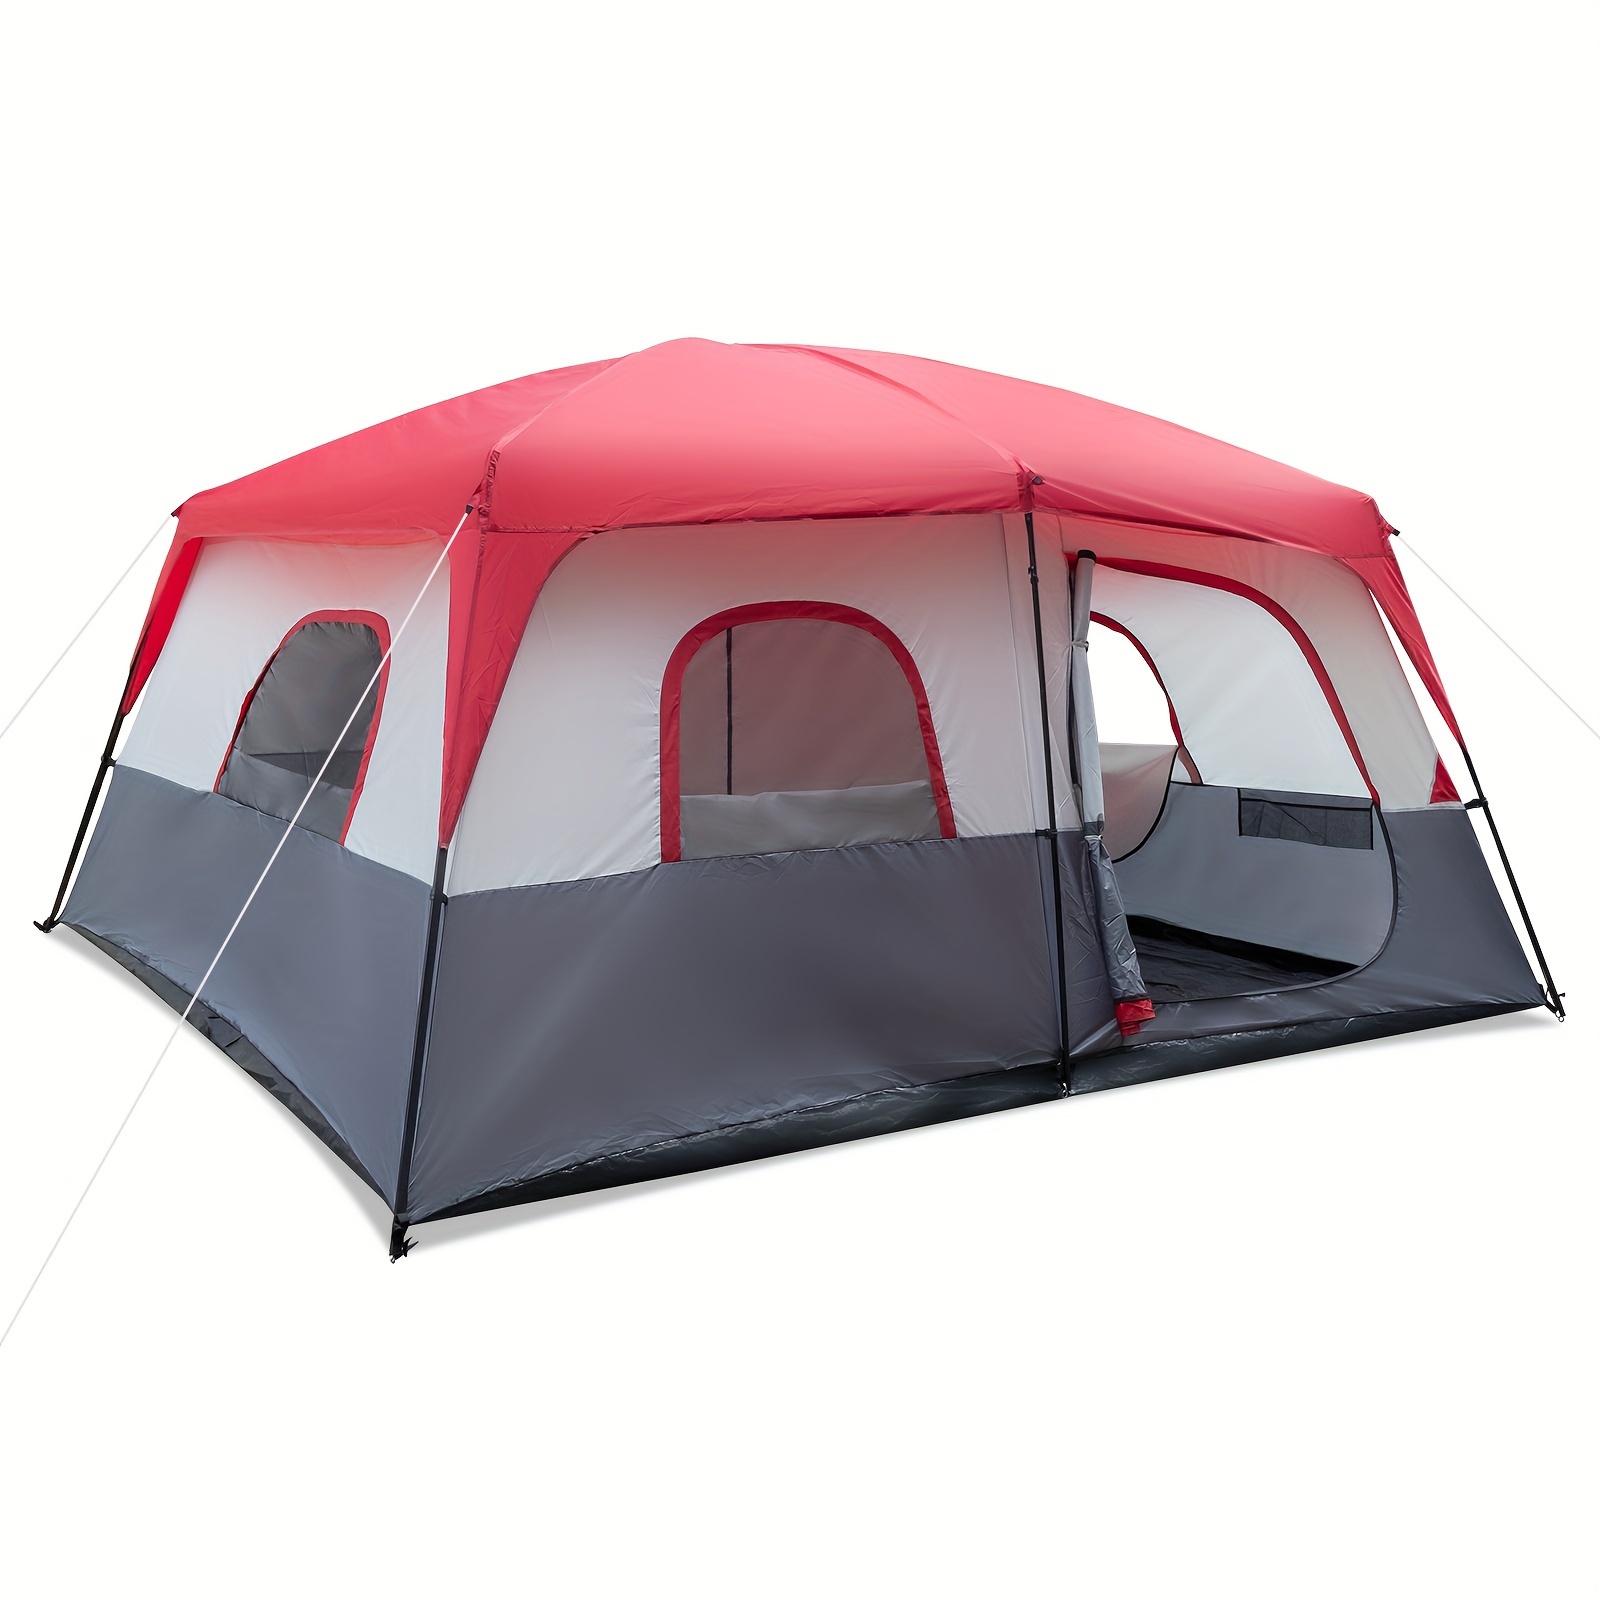 

1pc Waterproof Zipper Camping Tent, 14 Persons Capacity, Suitable For Outdoor Camping, Picnic, Travel